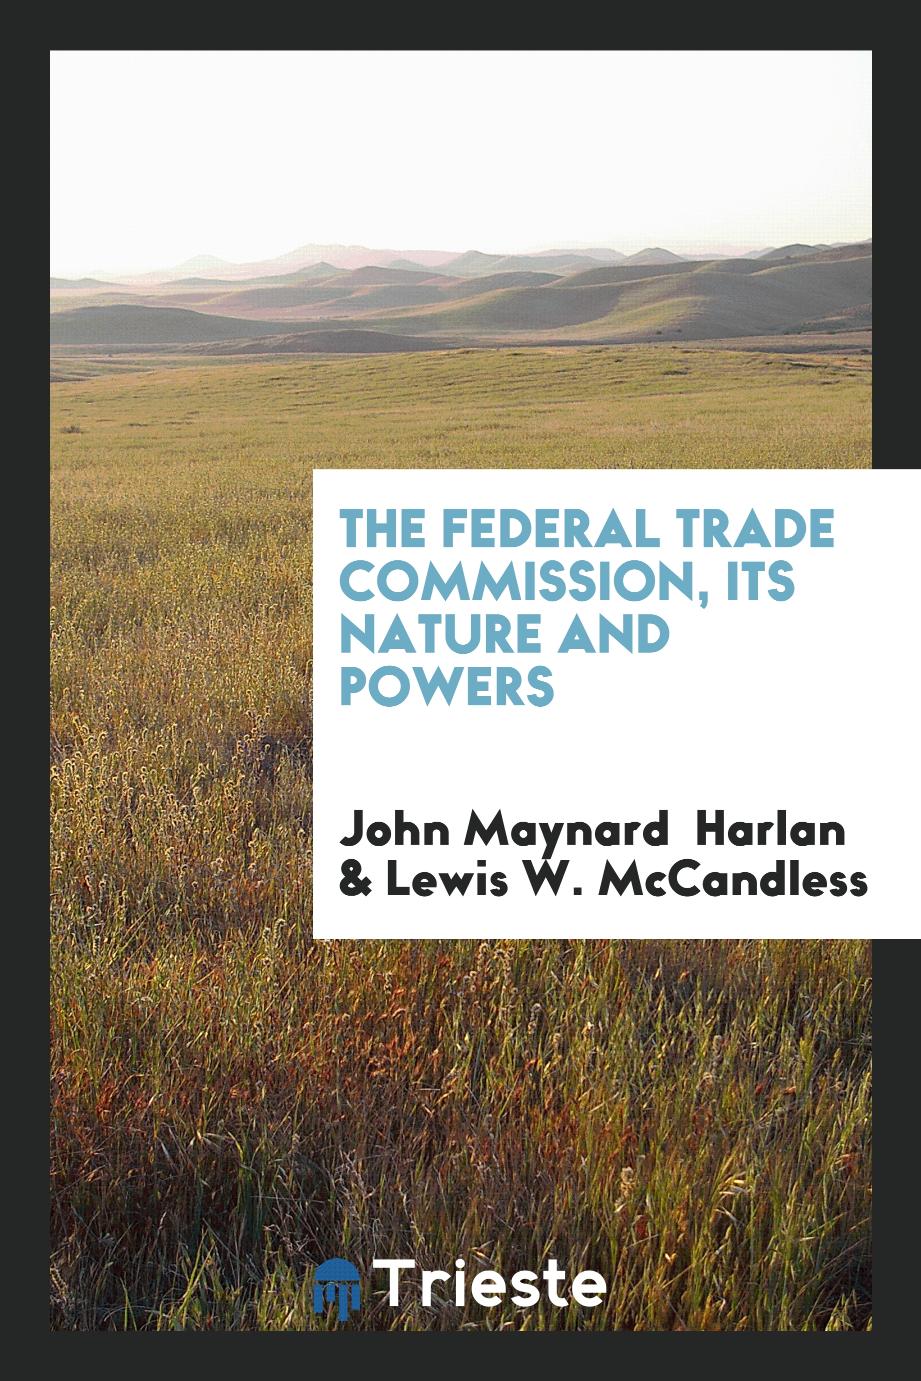 The Federal Trade Commission, Its Nature and Powers